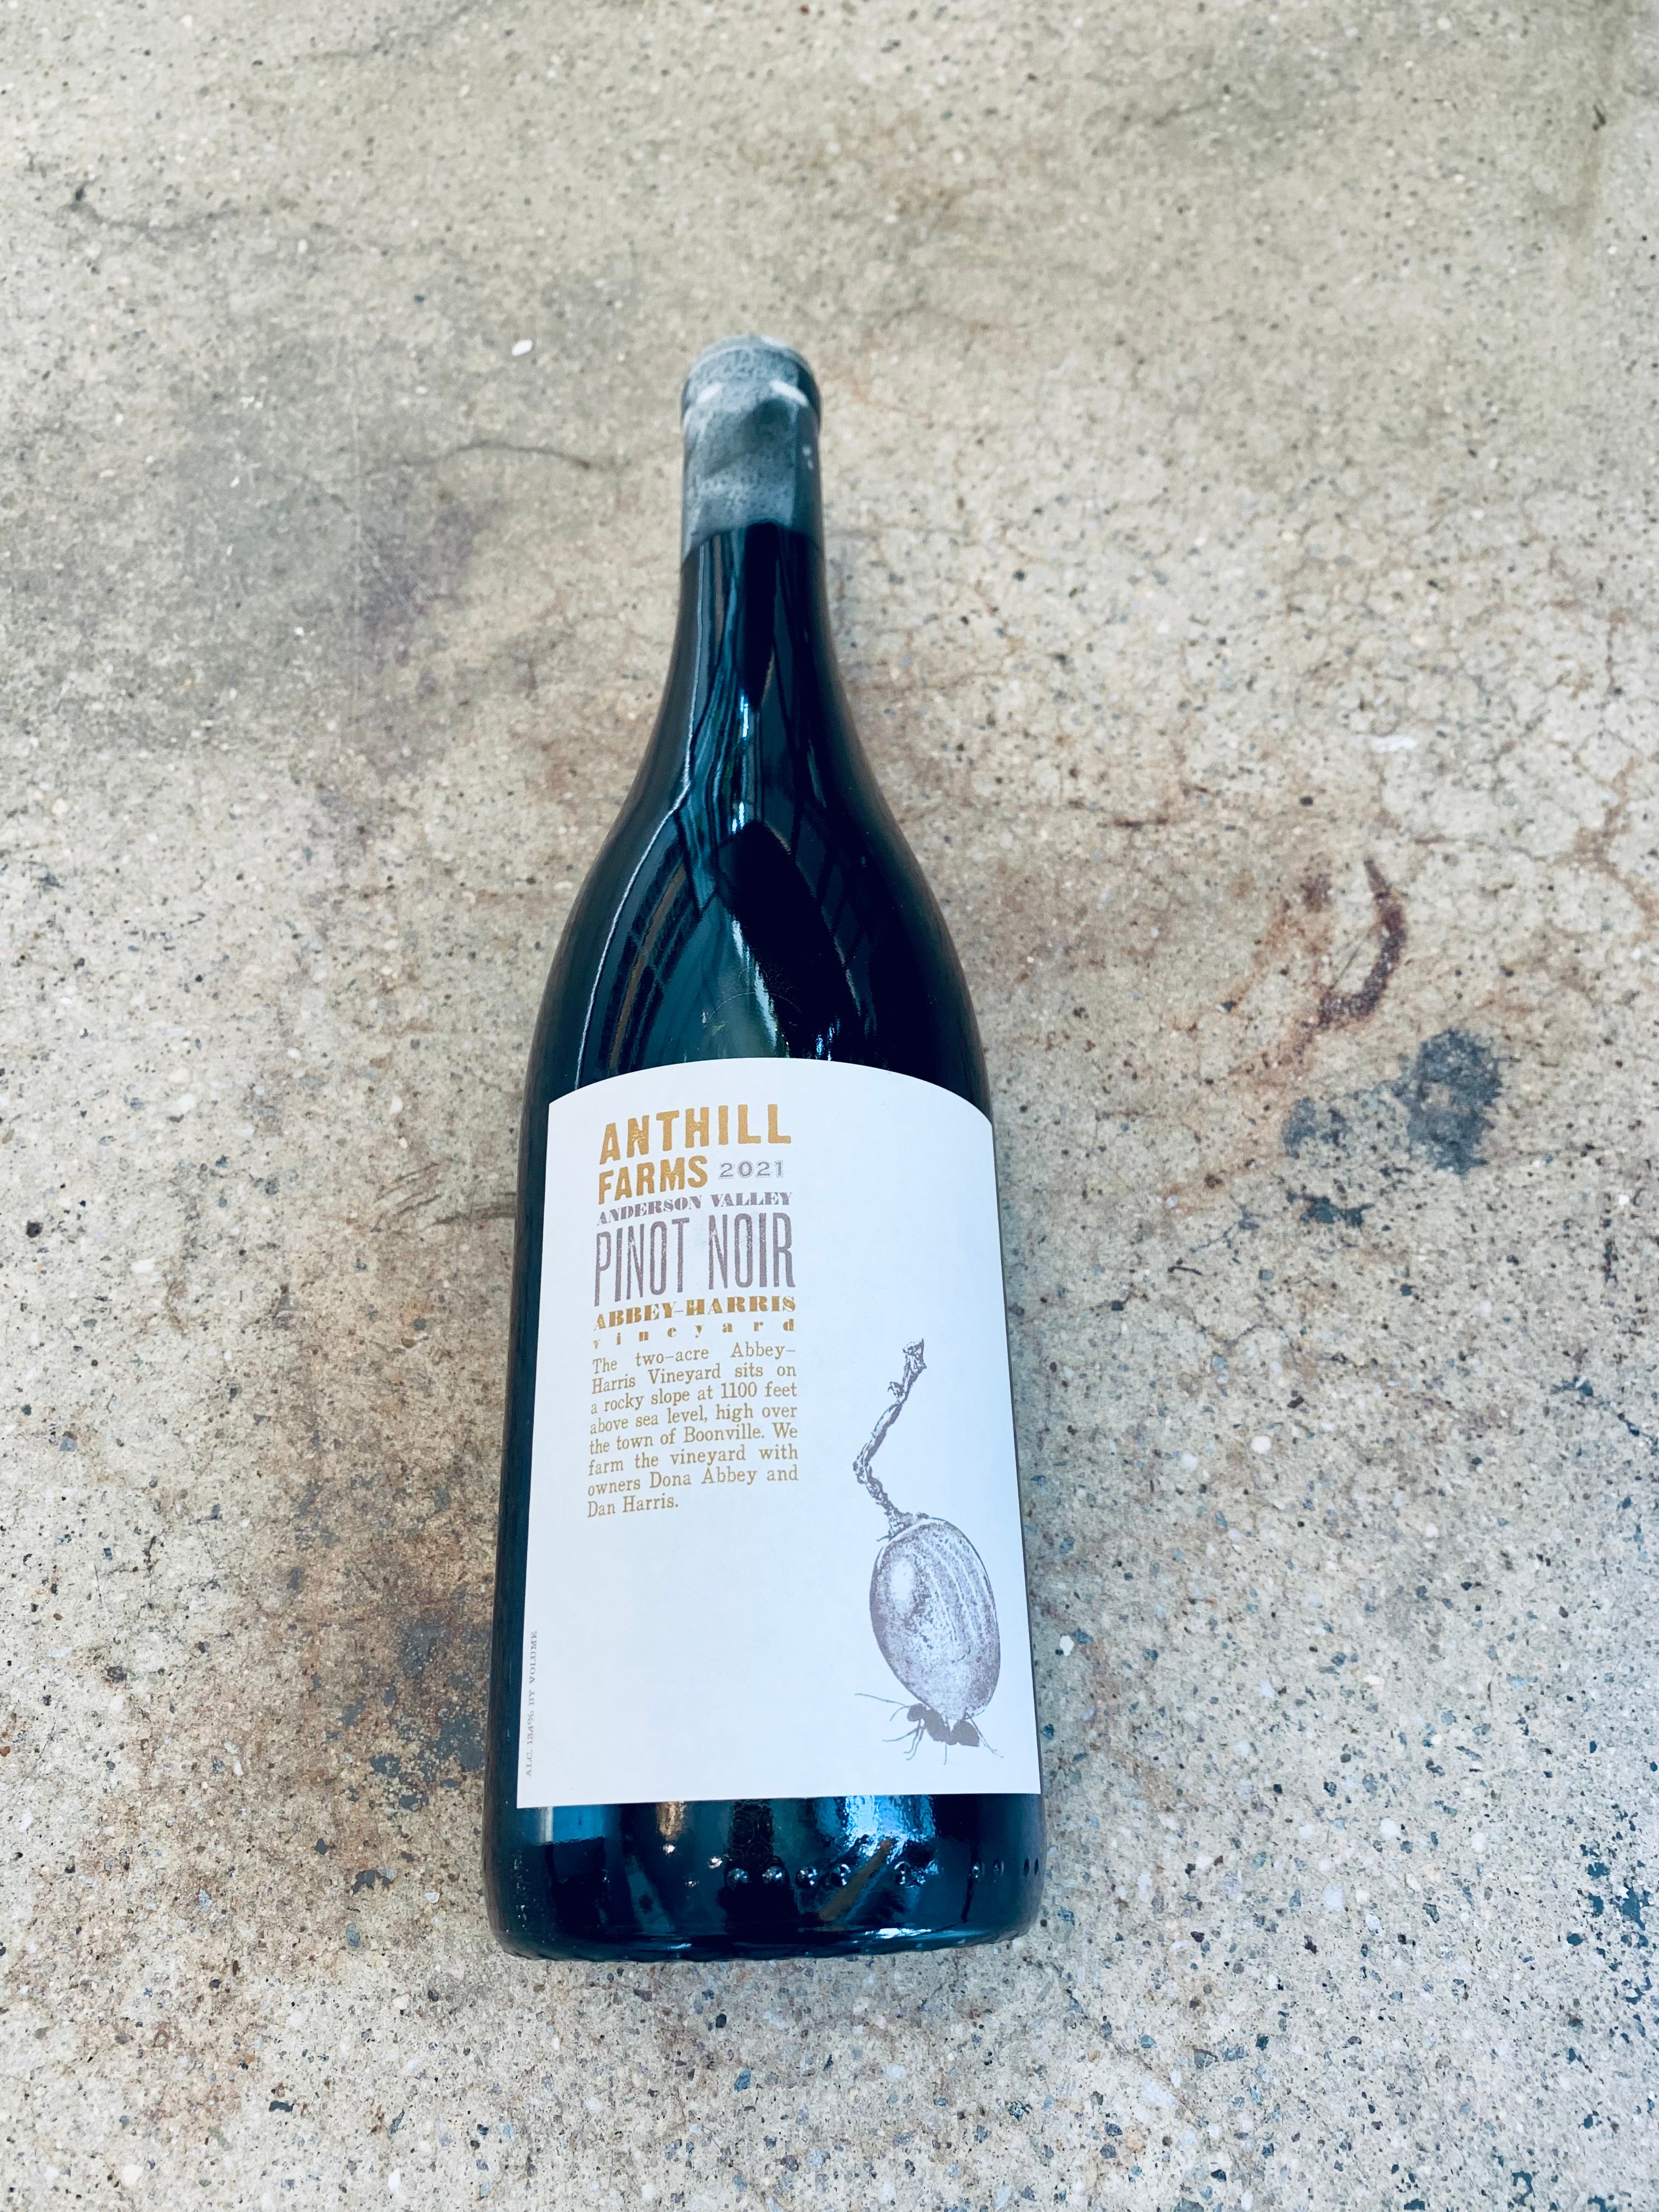 Anthill Farms - Pinot Noir "Abbey-Harris Vineyard" Anderson Valley 2021 750ml (13.4% ABV)